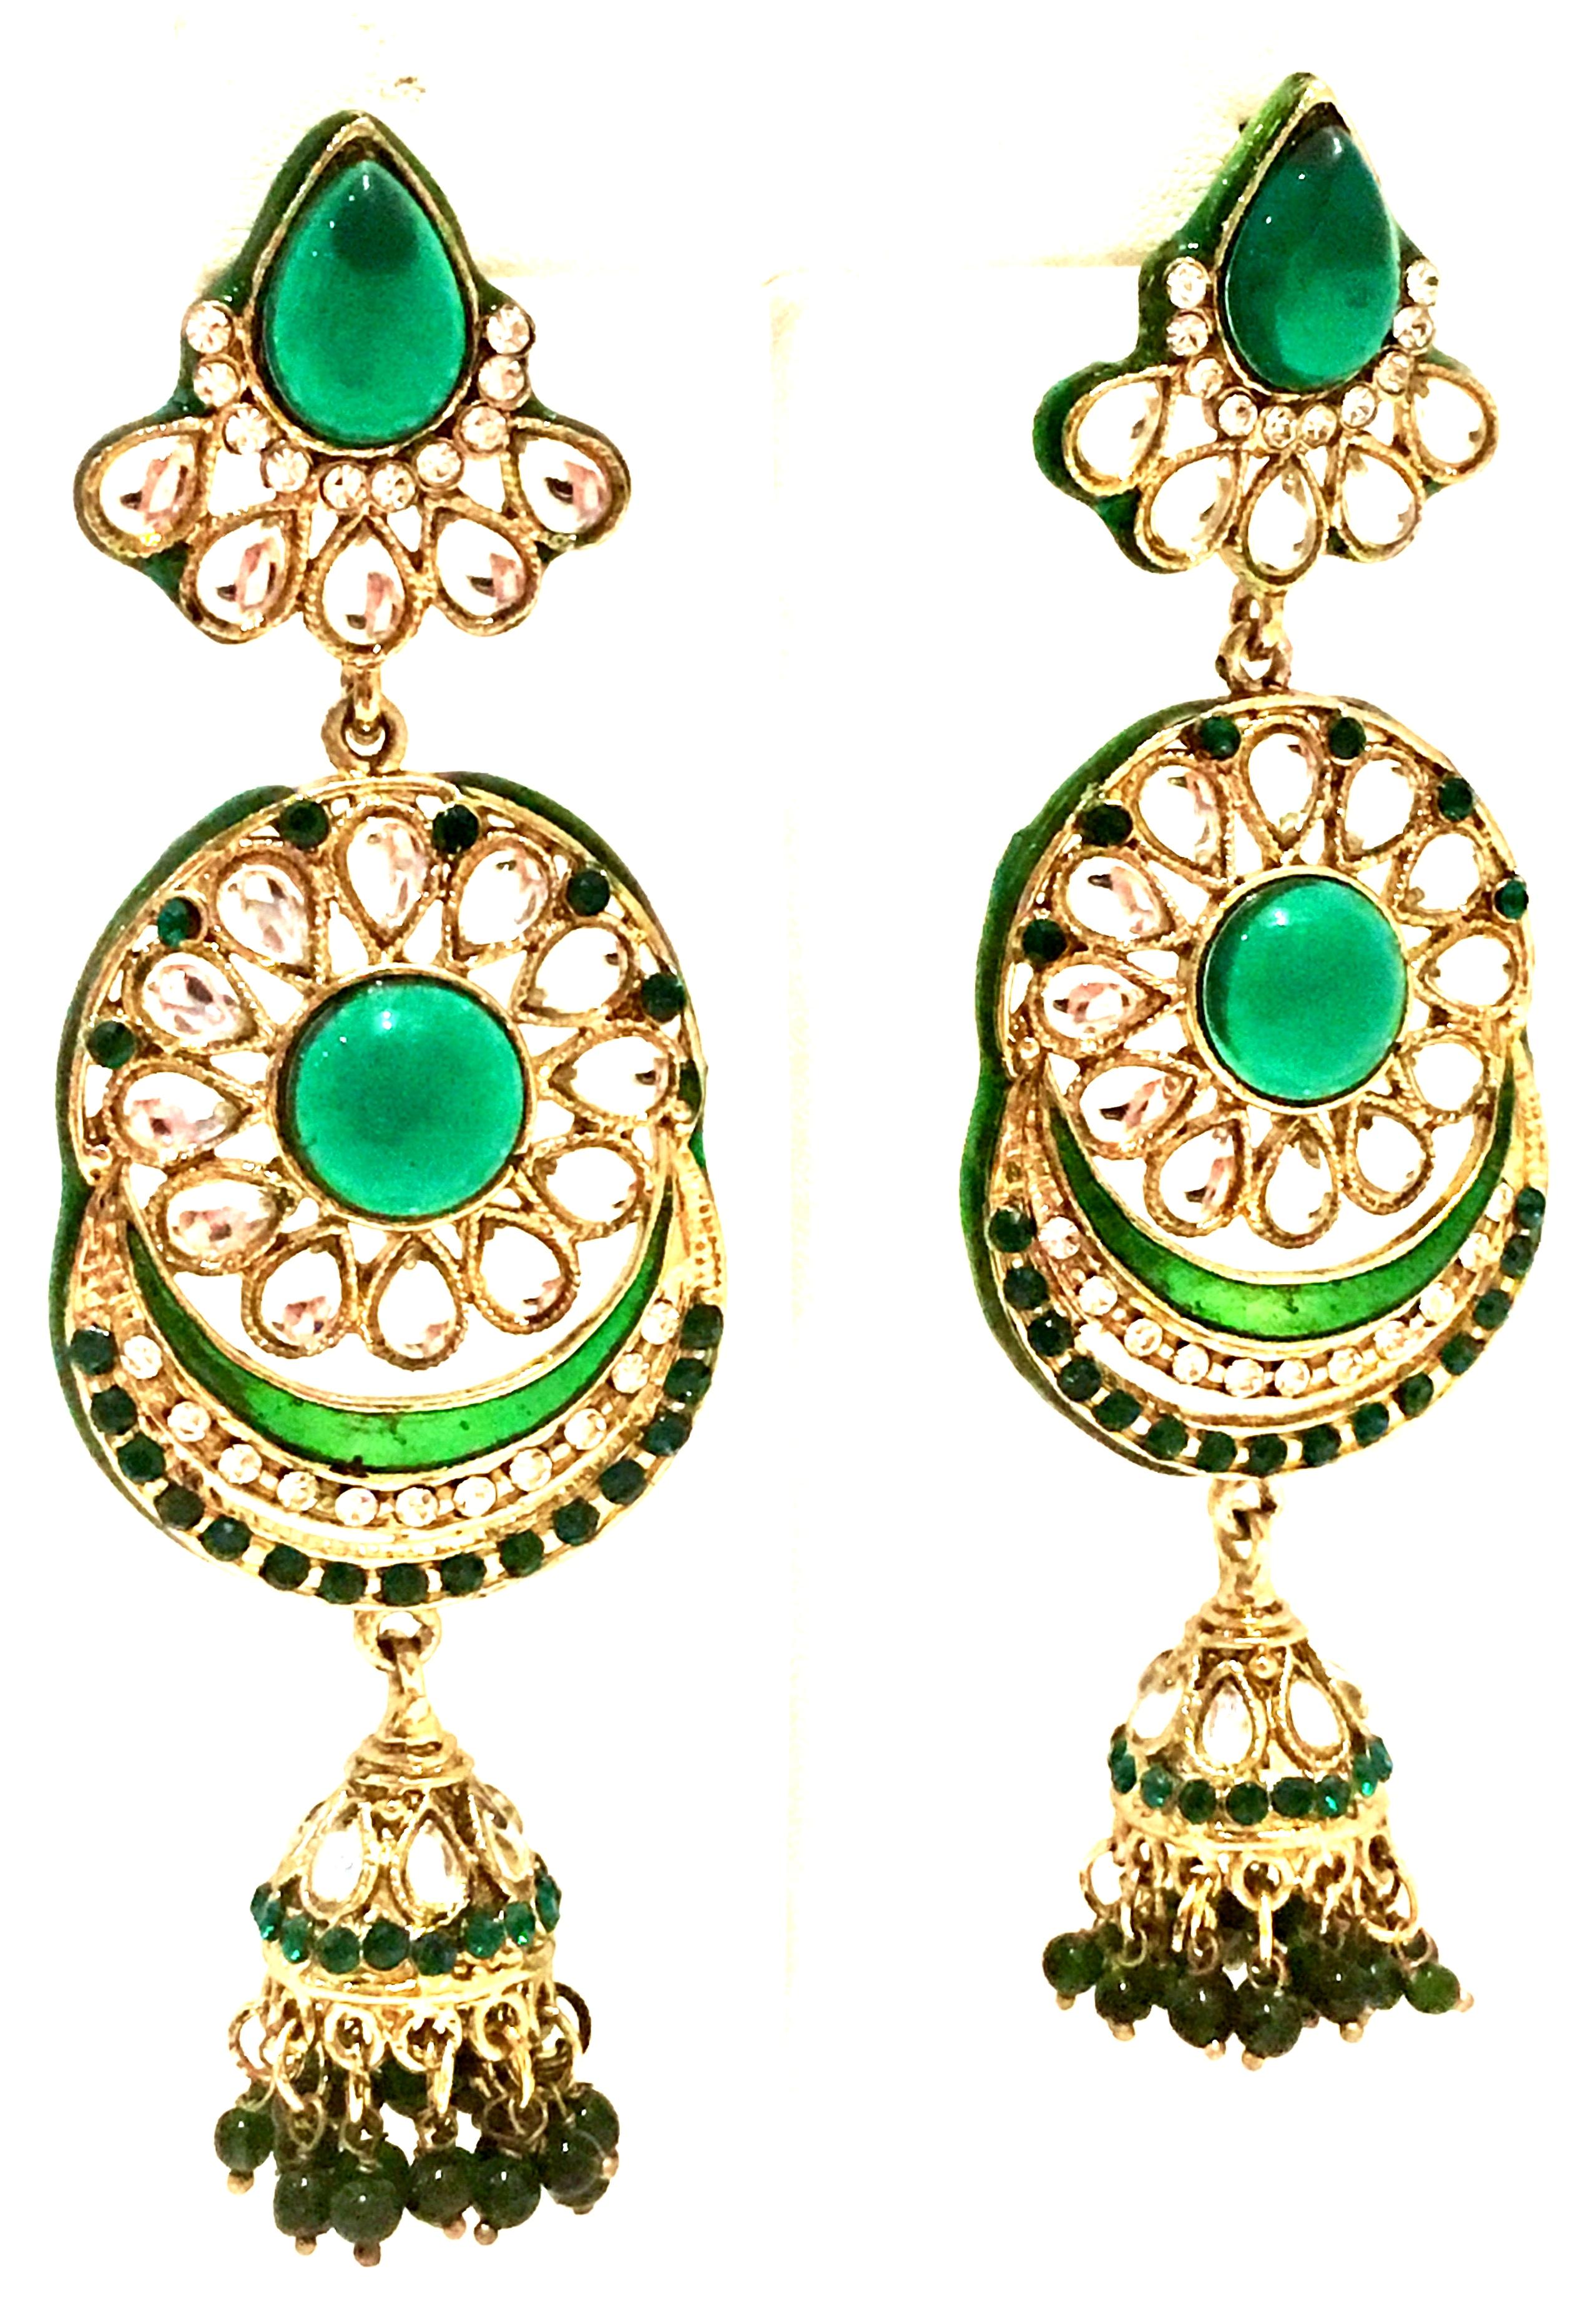 20th Century Pair Of Gold, Austrian Crystal, Enamel, Resin Bead And Molded Glass Chandelier Earrings. These dramatic gold plate Maharaja style 4.25